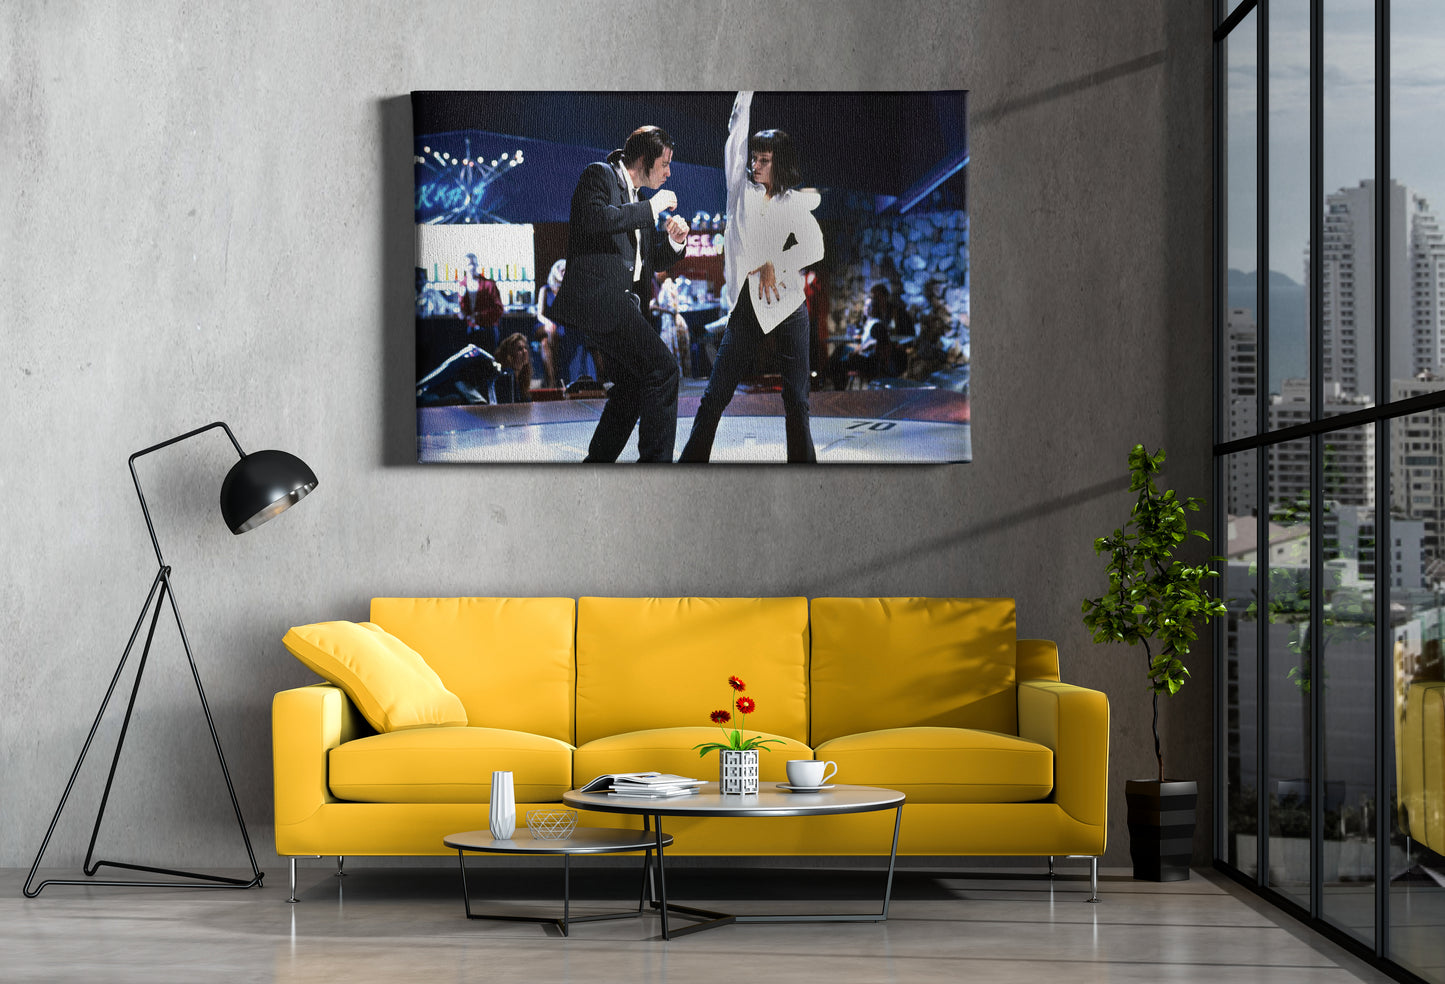 Pulp Fiction Poster Dance Twist Scene Movie Hand Made Posters Canvas Print Wall Art Home Decor